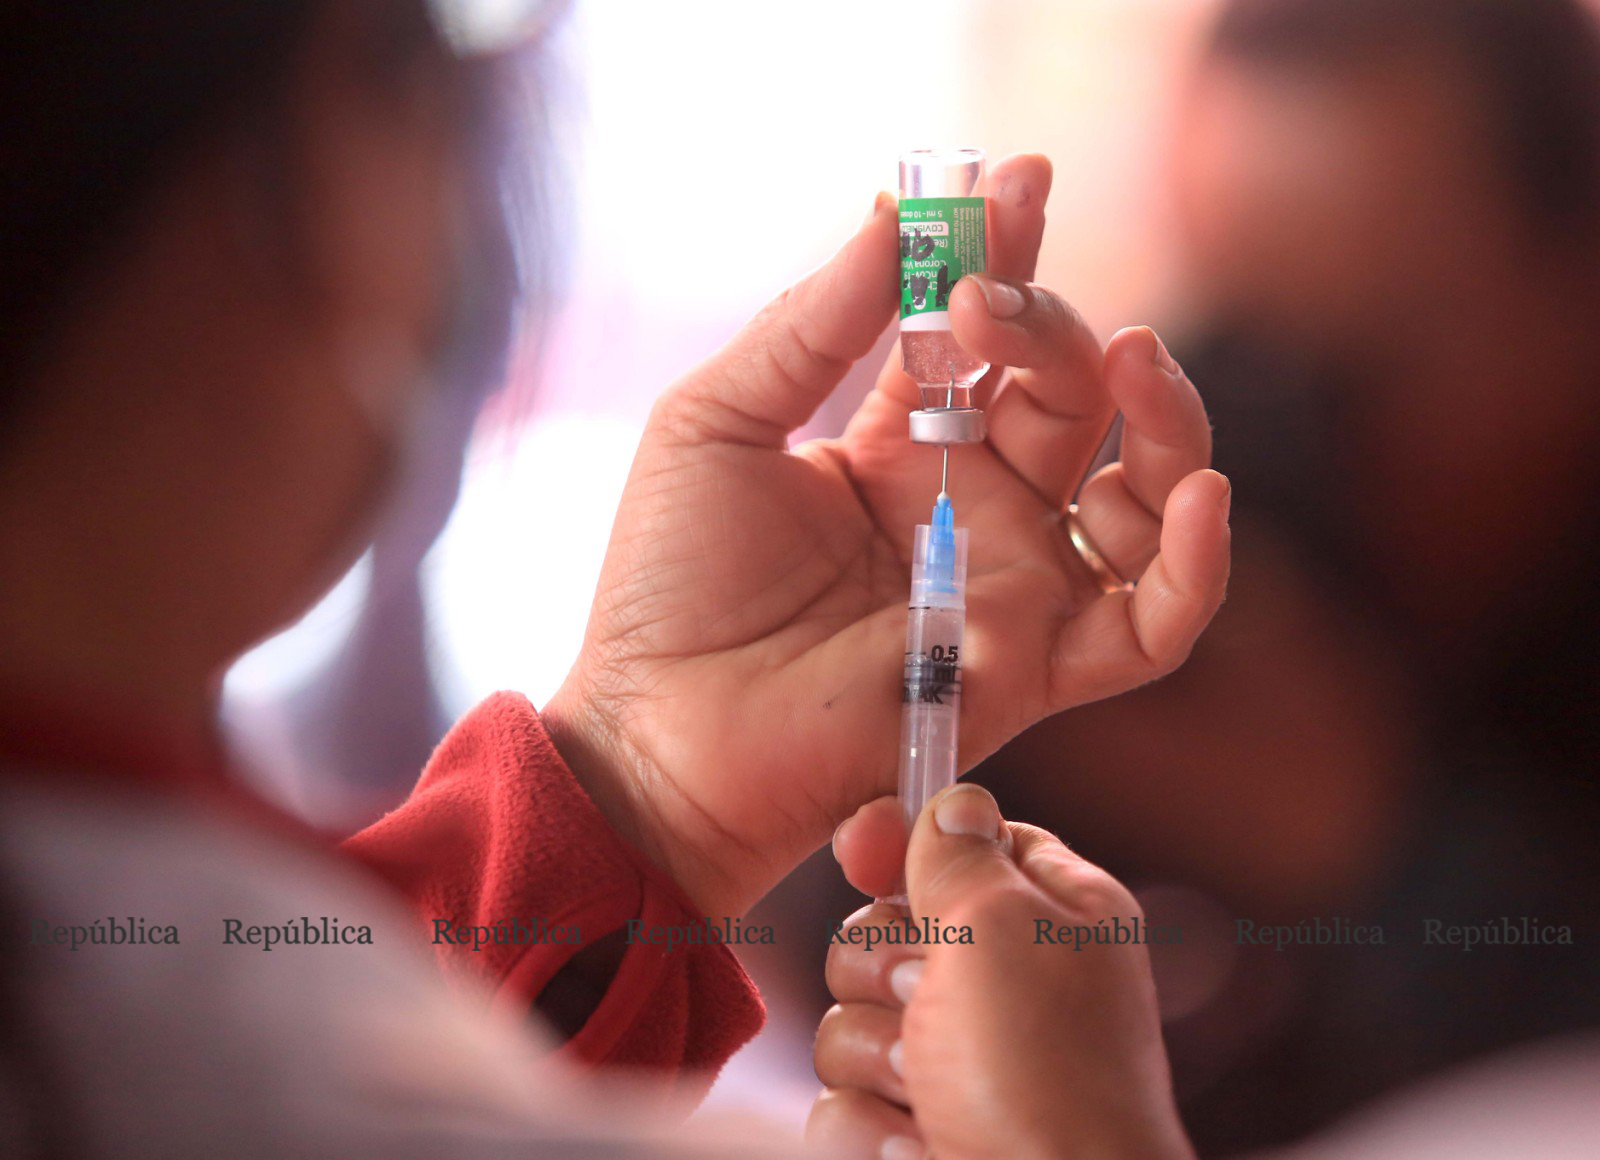 61 percent of population fully vaccinated in Province 1: Health ministry